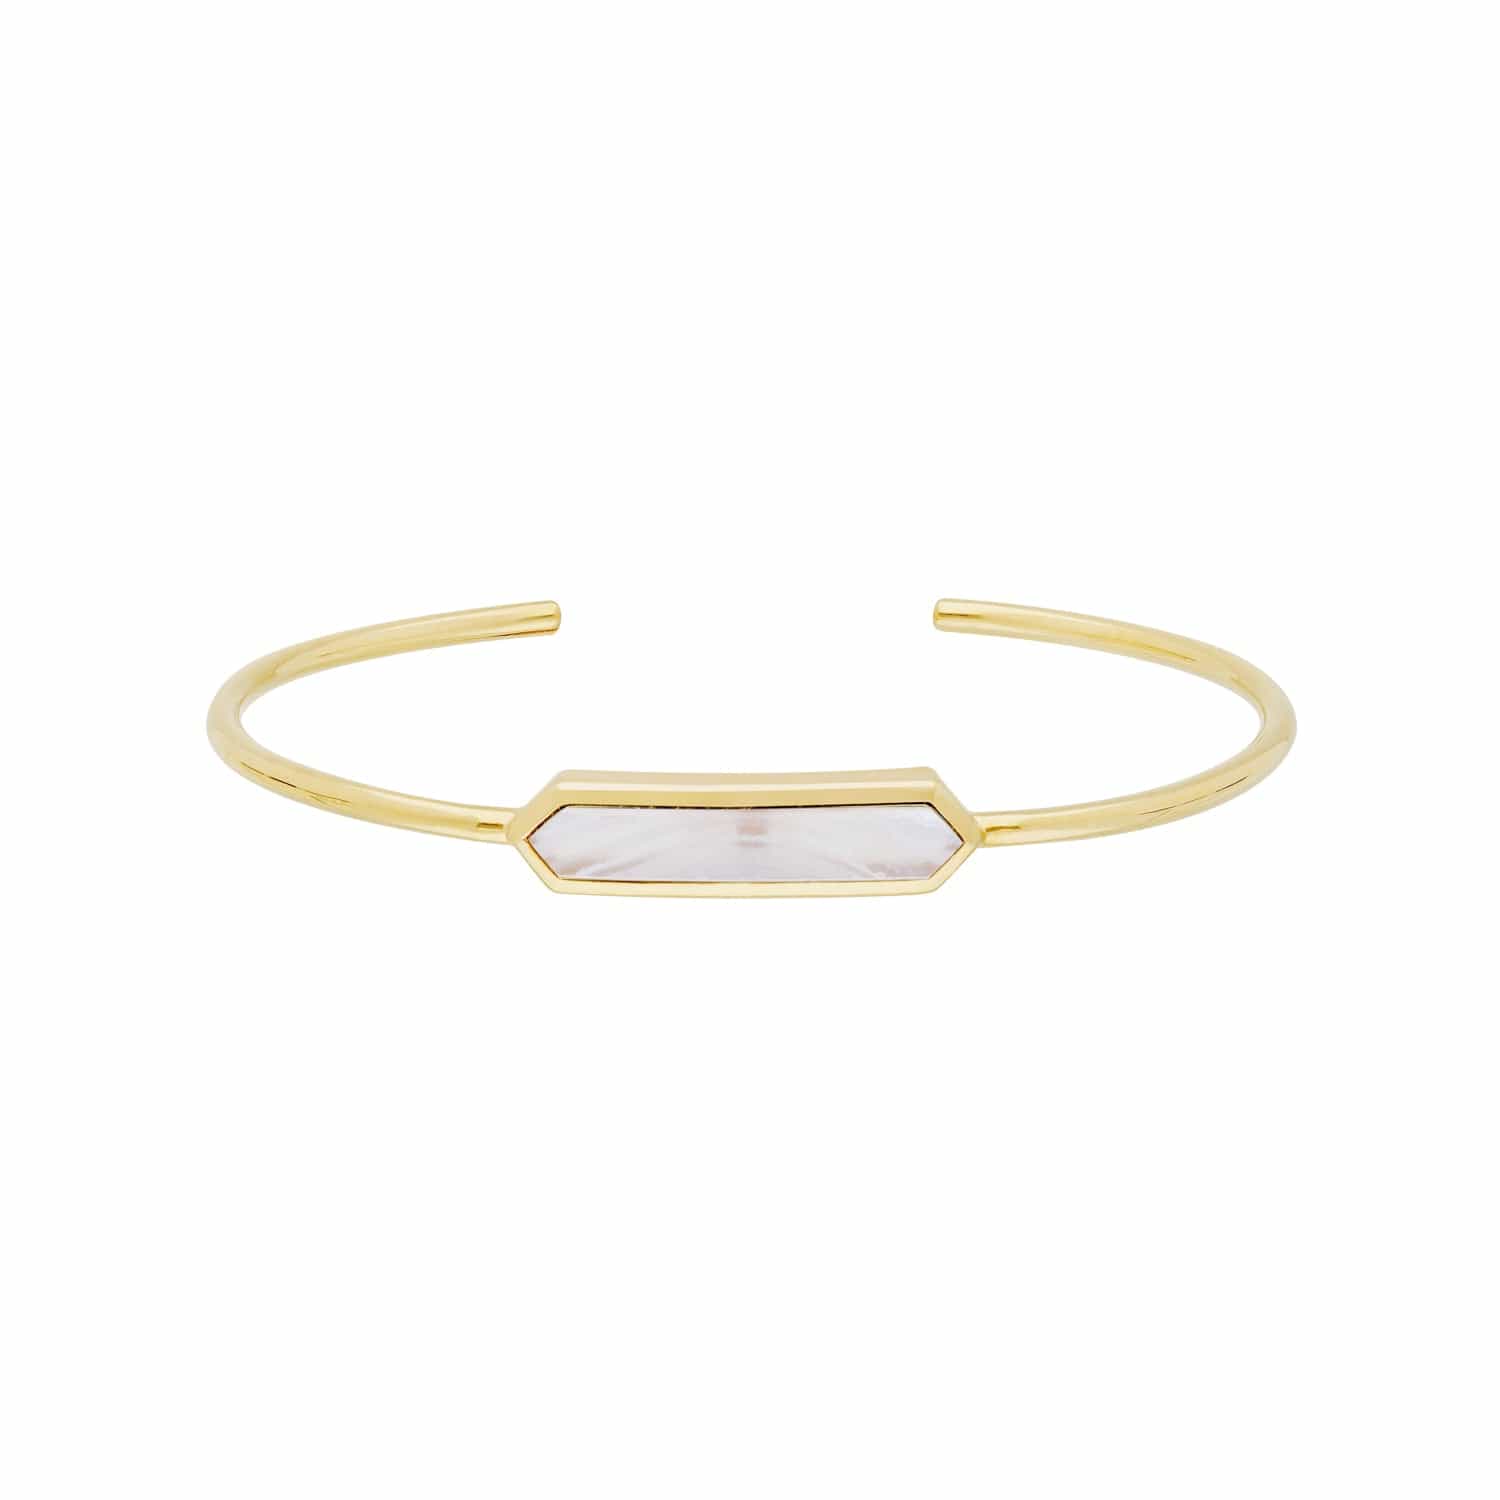 Geometric Prism Mother of Pearl Bangle in Gold Plated Silver - Gemondo